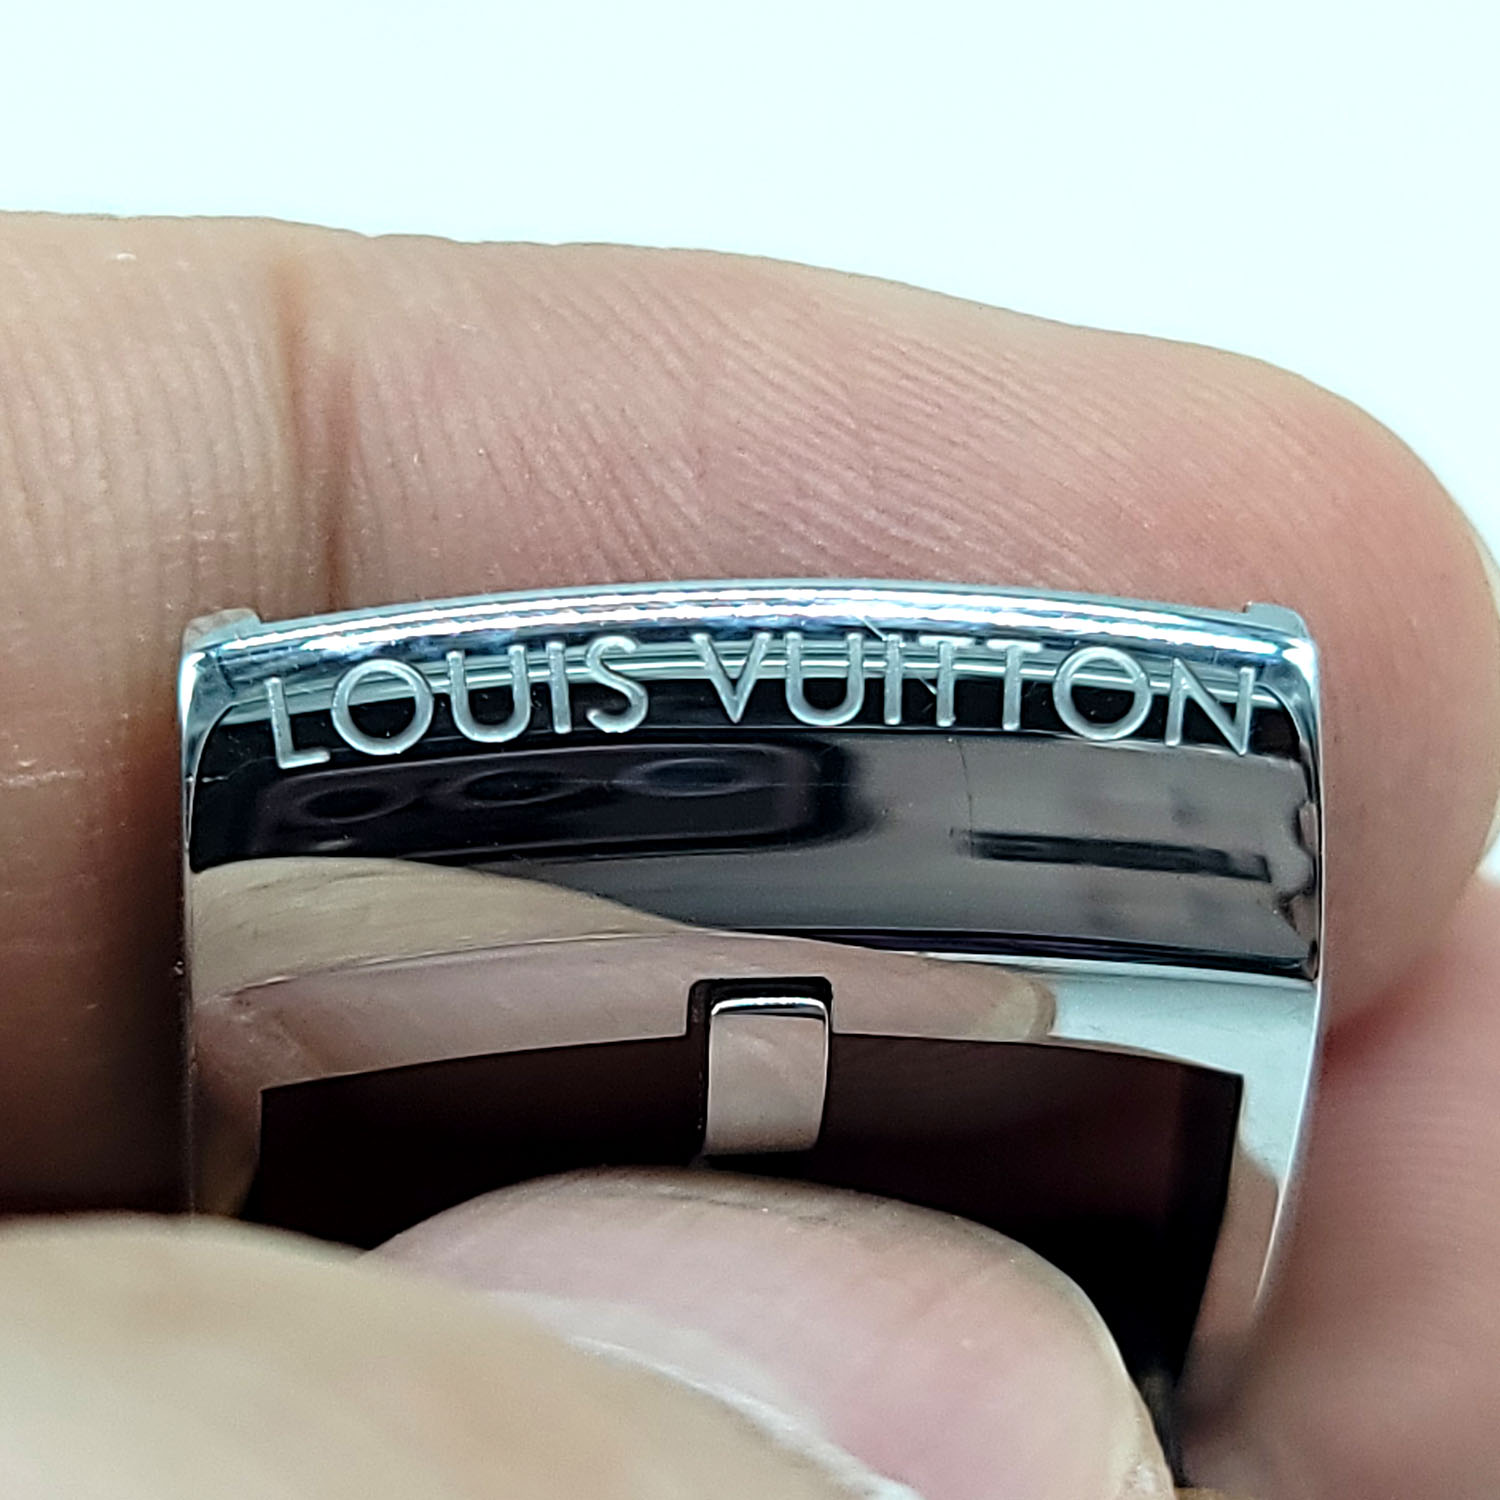 Louis Vuitton Tambour Monogram Eclipse QBB168 42mm in Stainless Steel - US